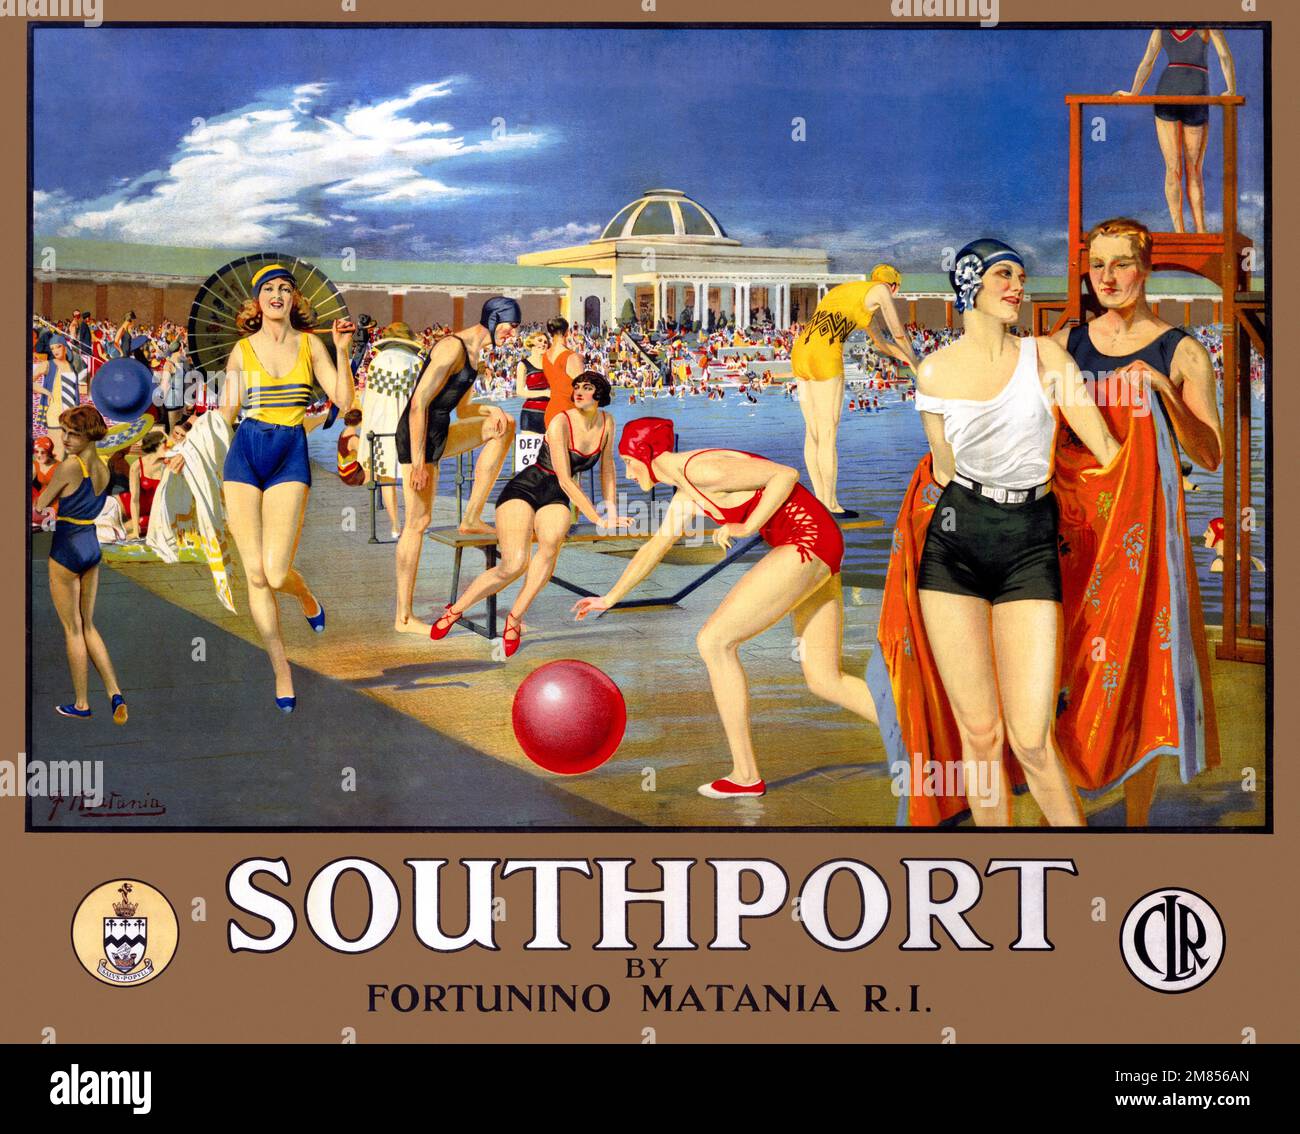 Southport by Fortunino Matania (1881-1963). Poster published in 1925 in the UK. Stock Photo